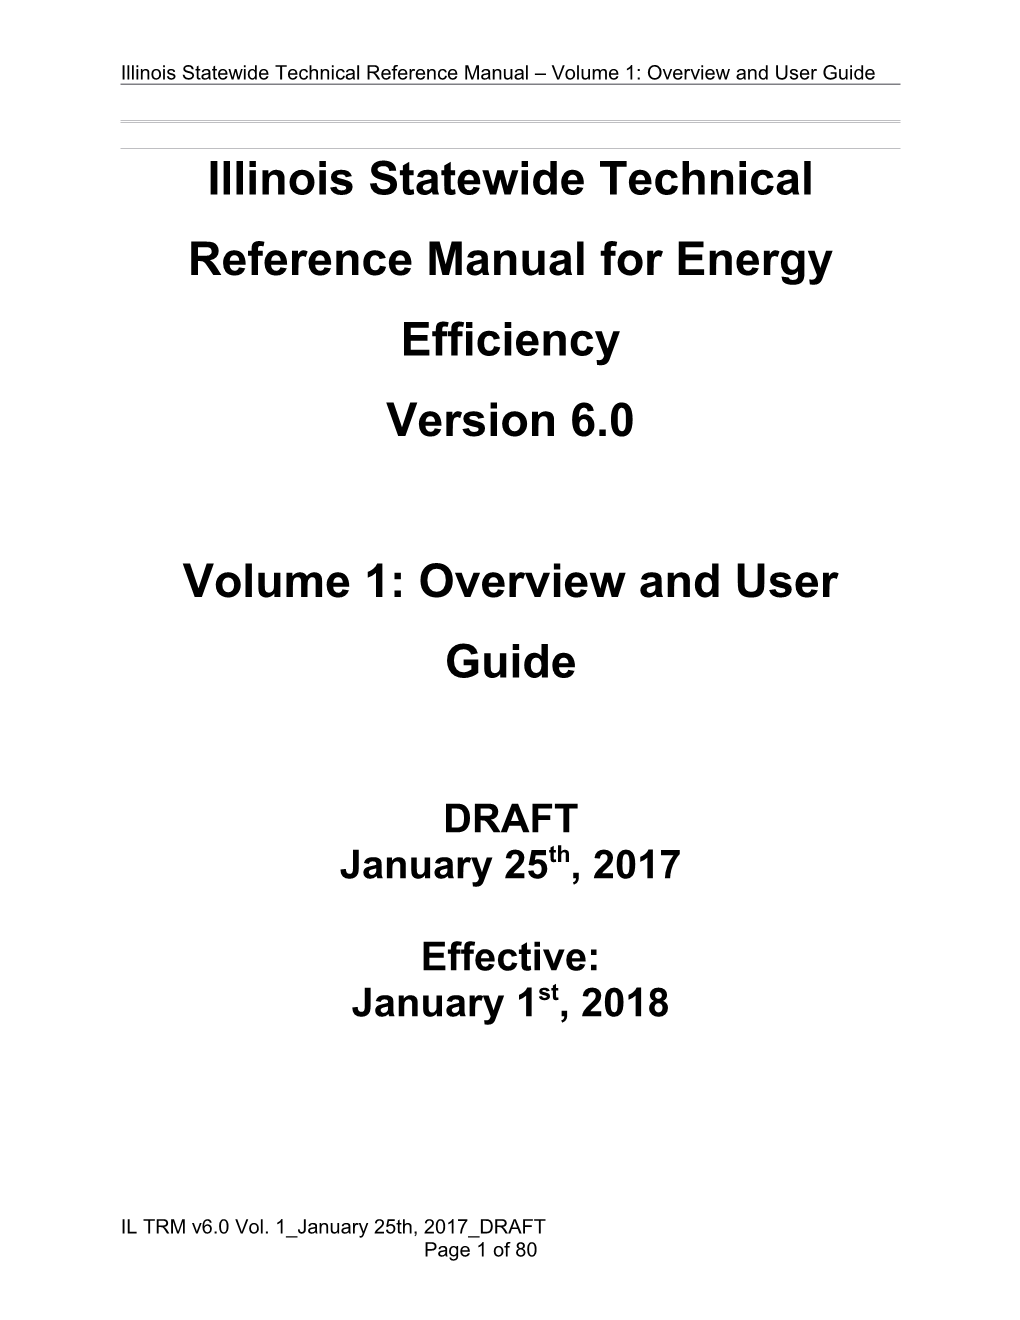 Illinois Statewide Technical Reference Manual for Energy Efficiency